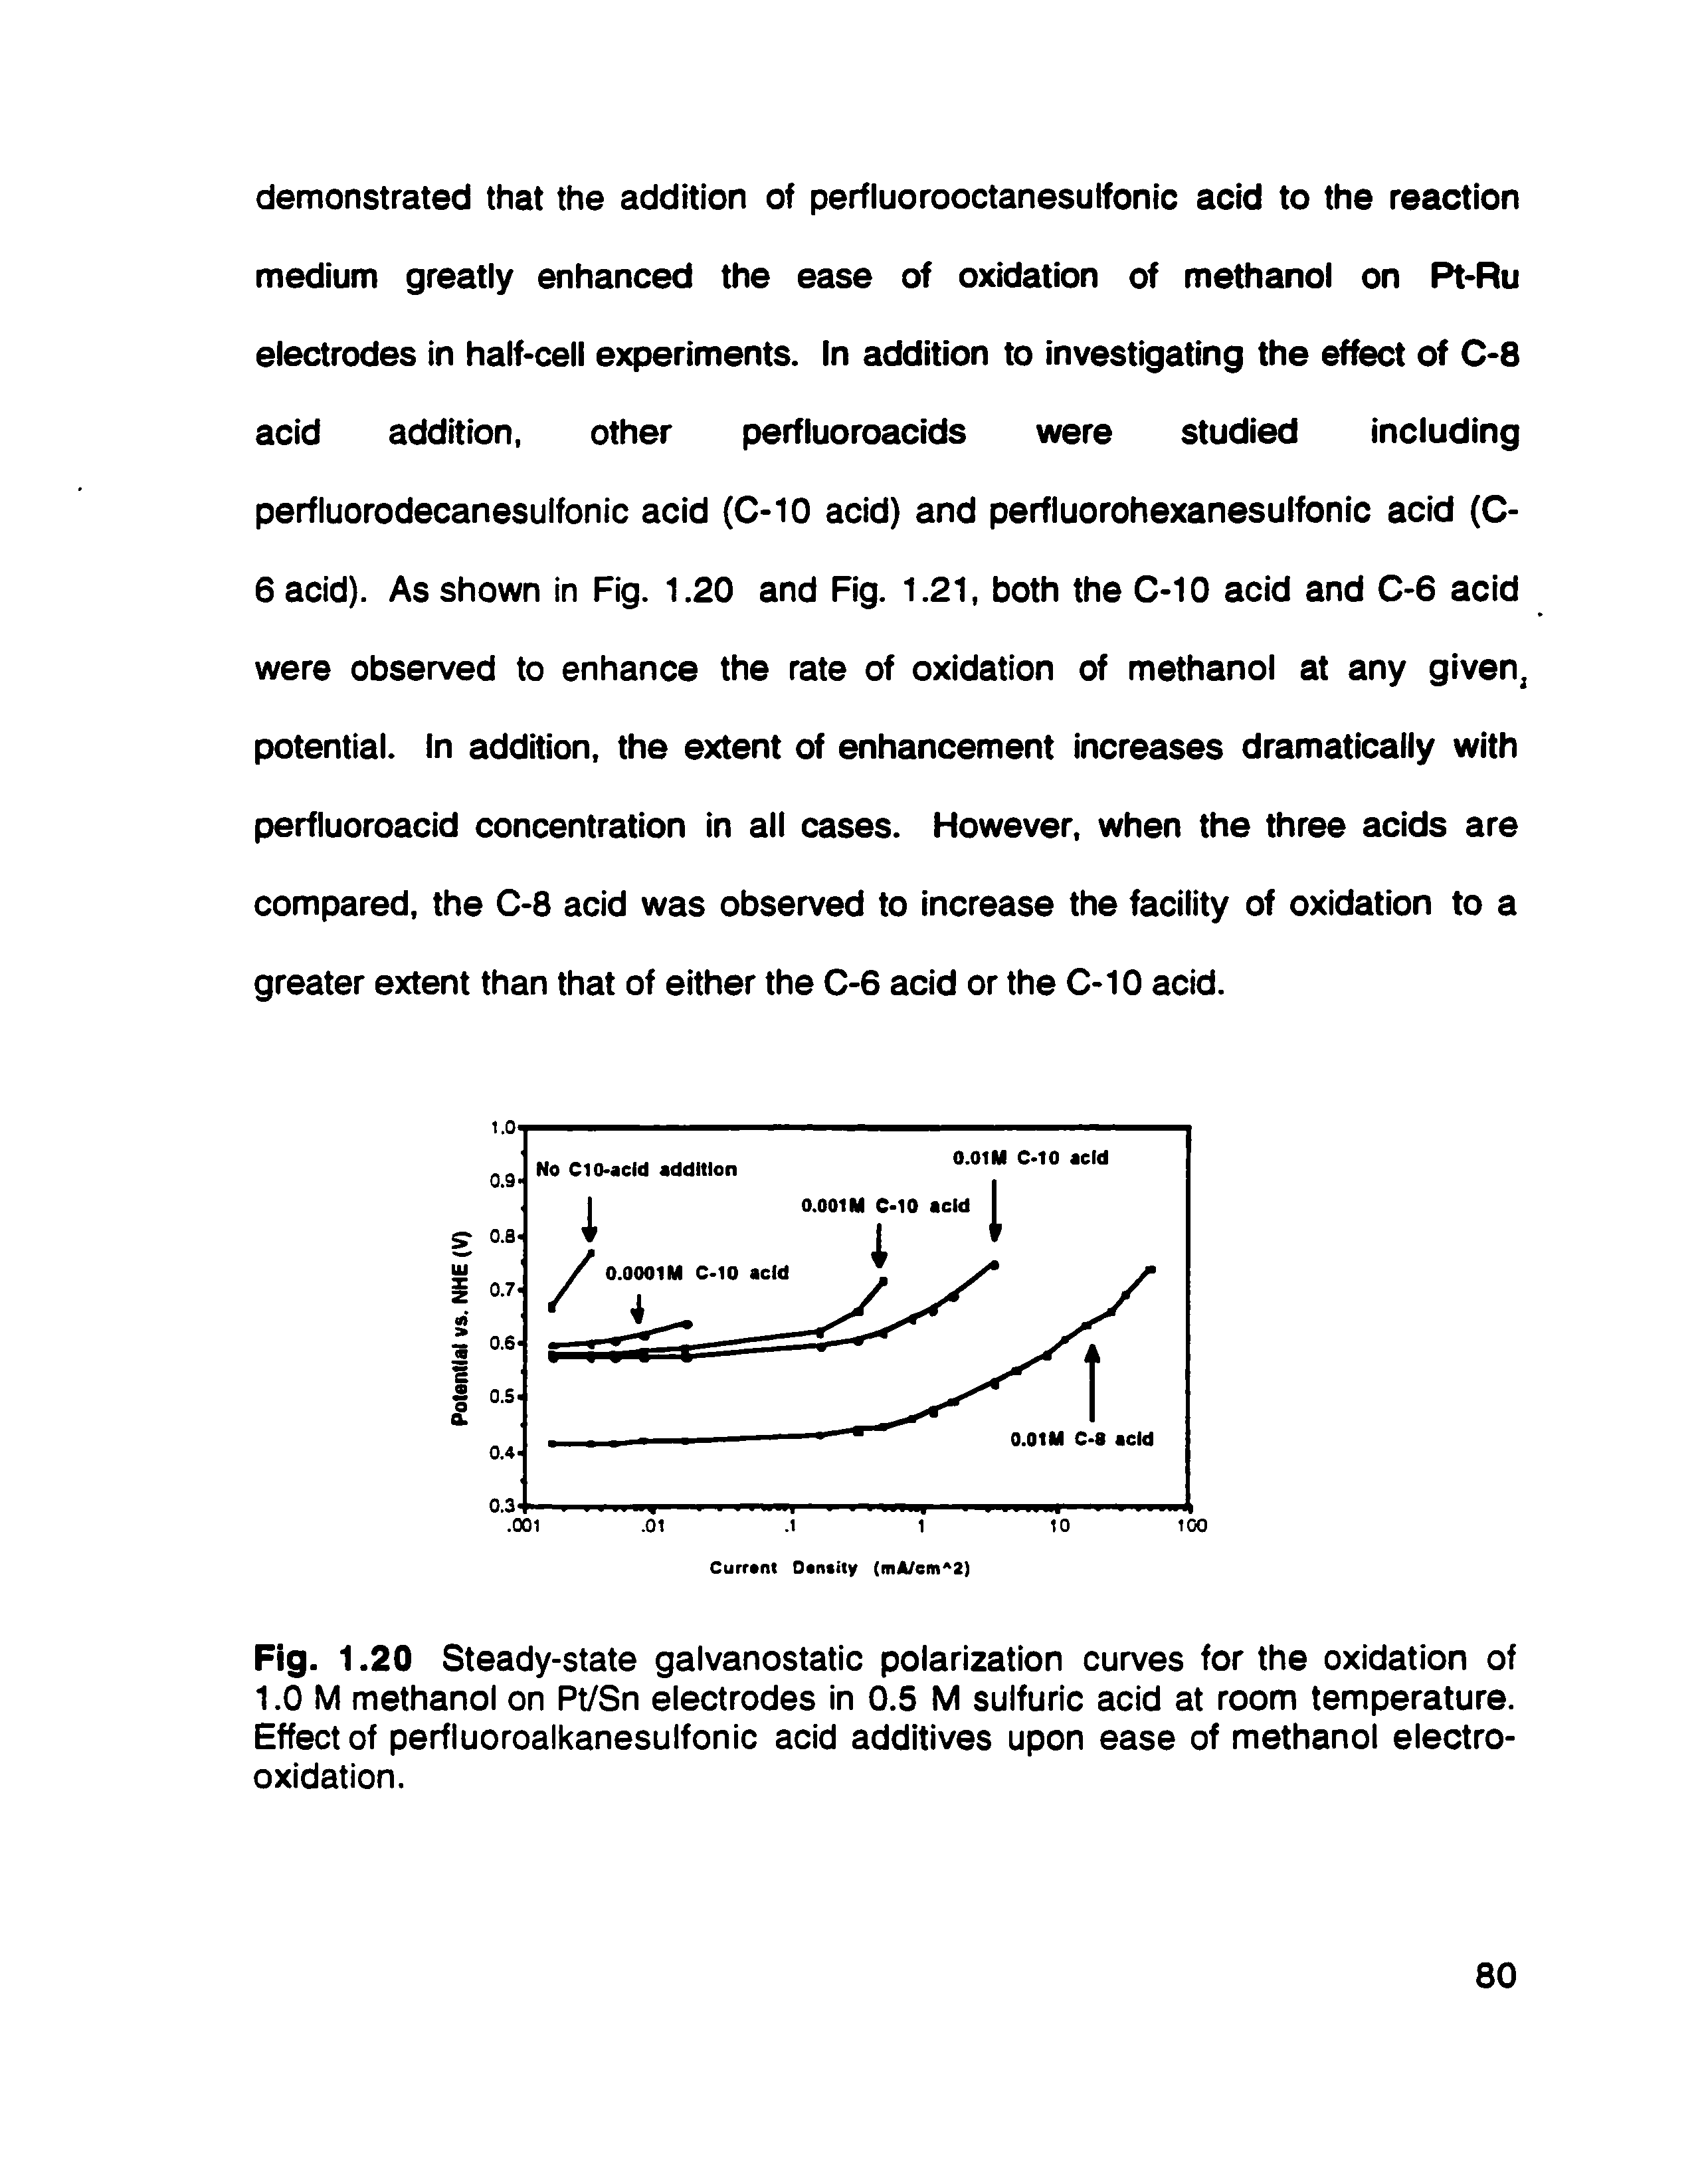 Fig. 1.20 Steady-state galvanostatic polarization curves for the oxidation of 1.0 M methanol on Pt/Sn electrodes in 0.5 M sulfuric acid at room temperature. Effect of perfiuoroalkanesulfonic acid additives upon ease of methanol electrooxidation.